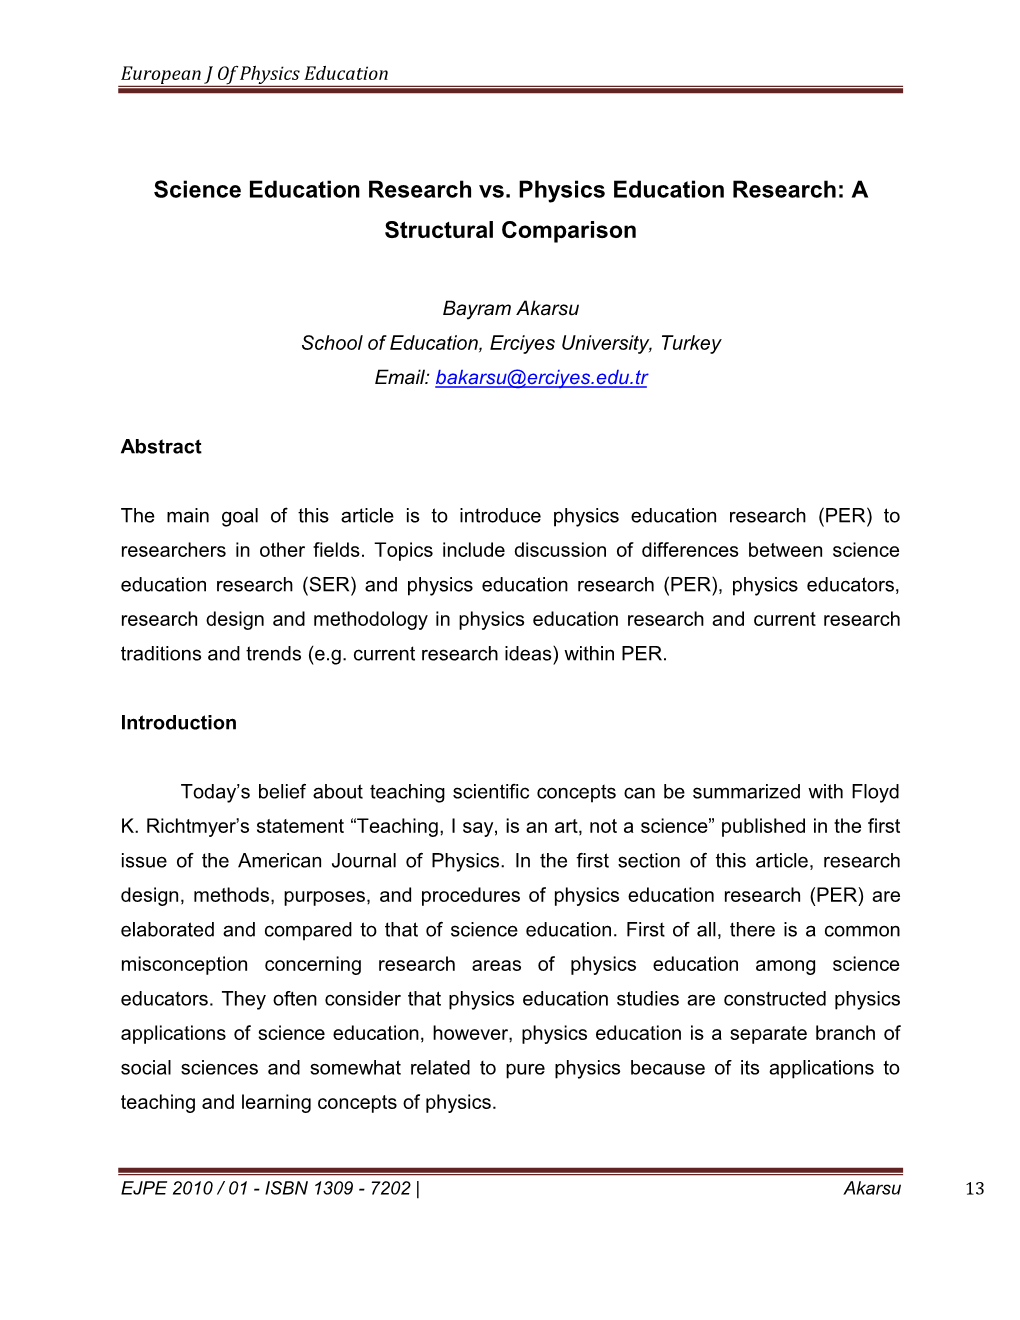 Science Education Research Vs. Physics Education Research: a Structural Comparison